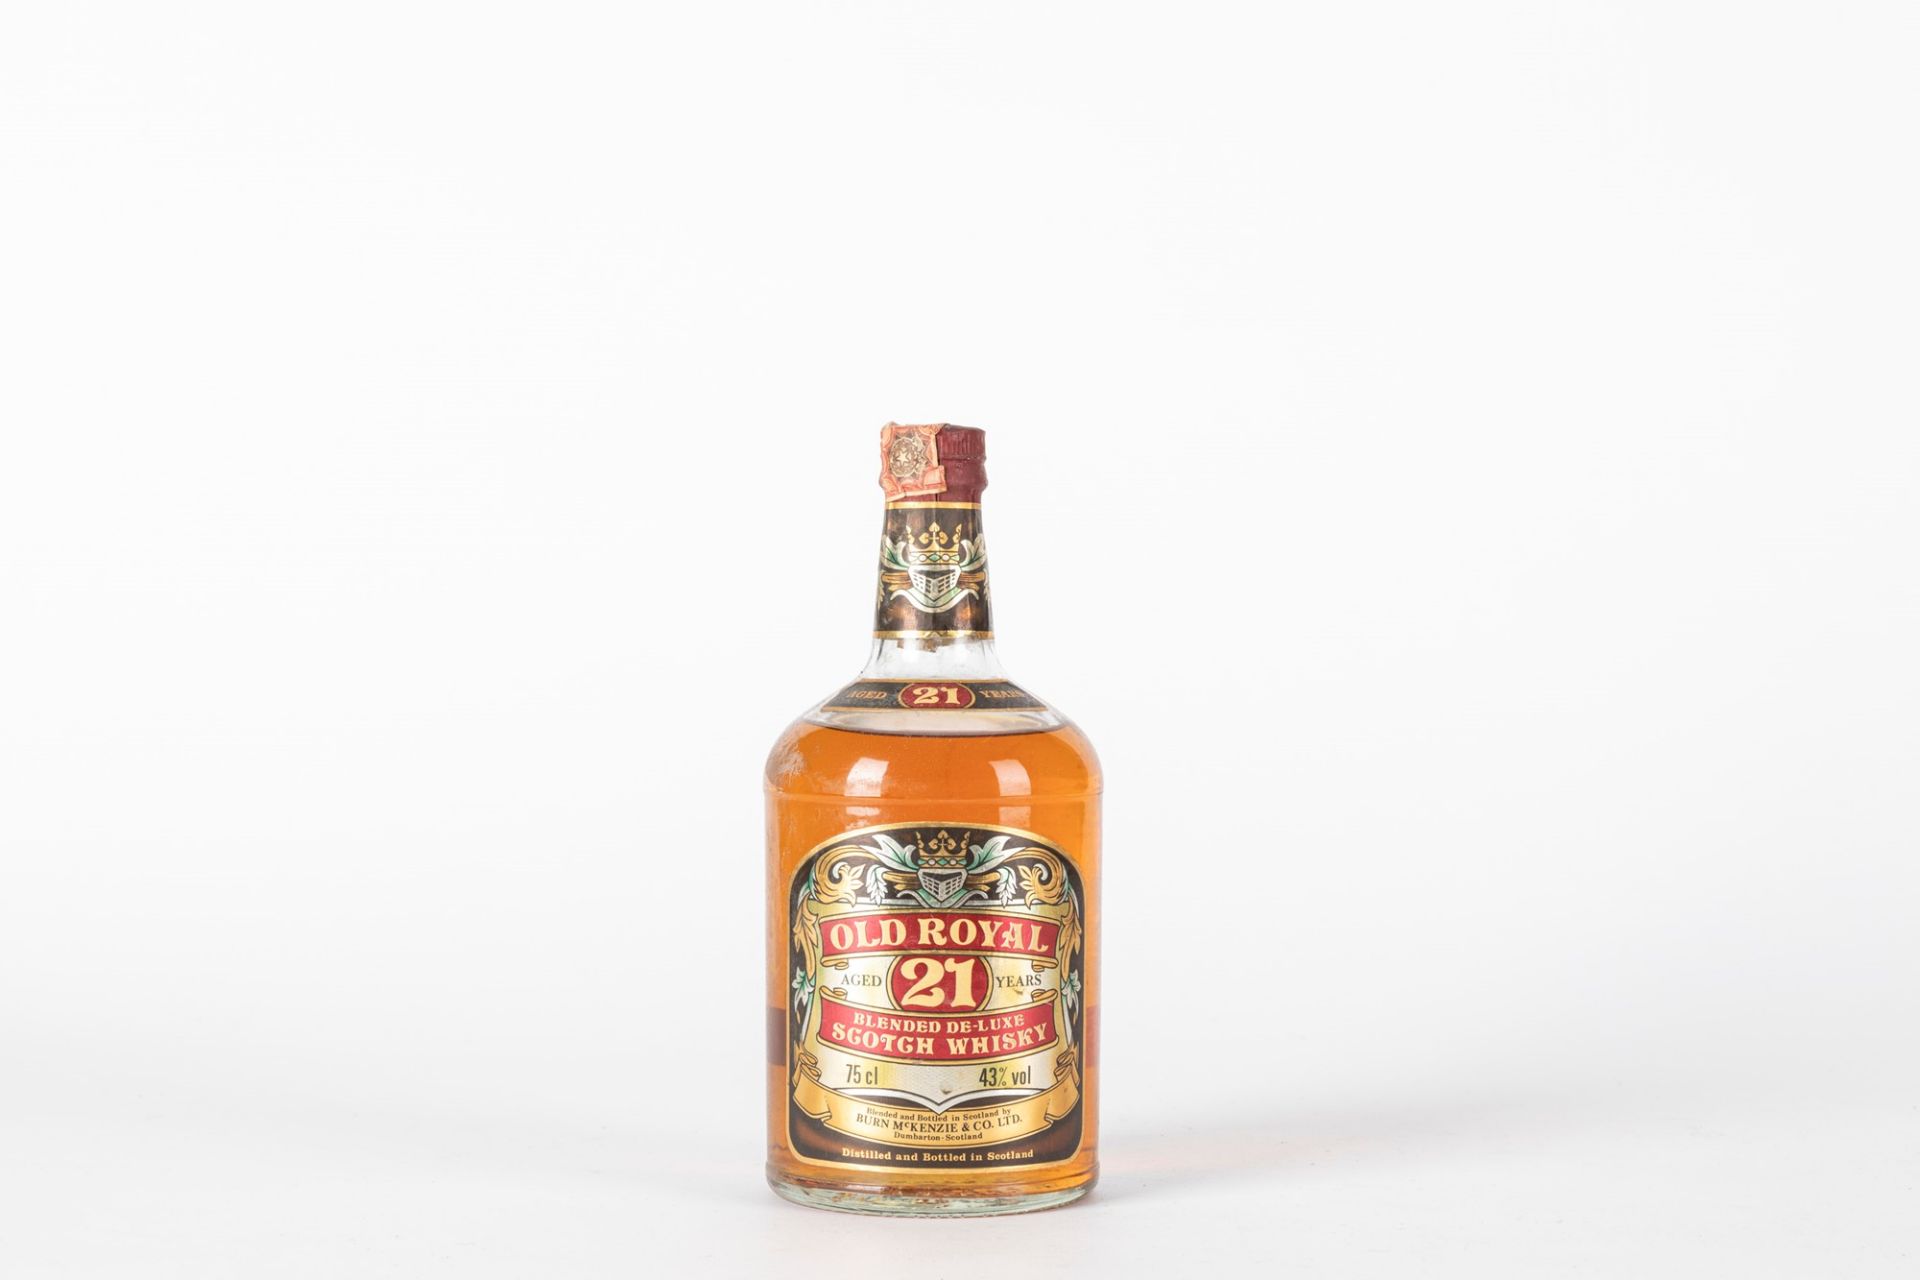 Scotland - Whisky / Old Royal 21 years